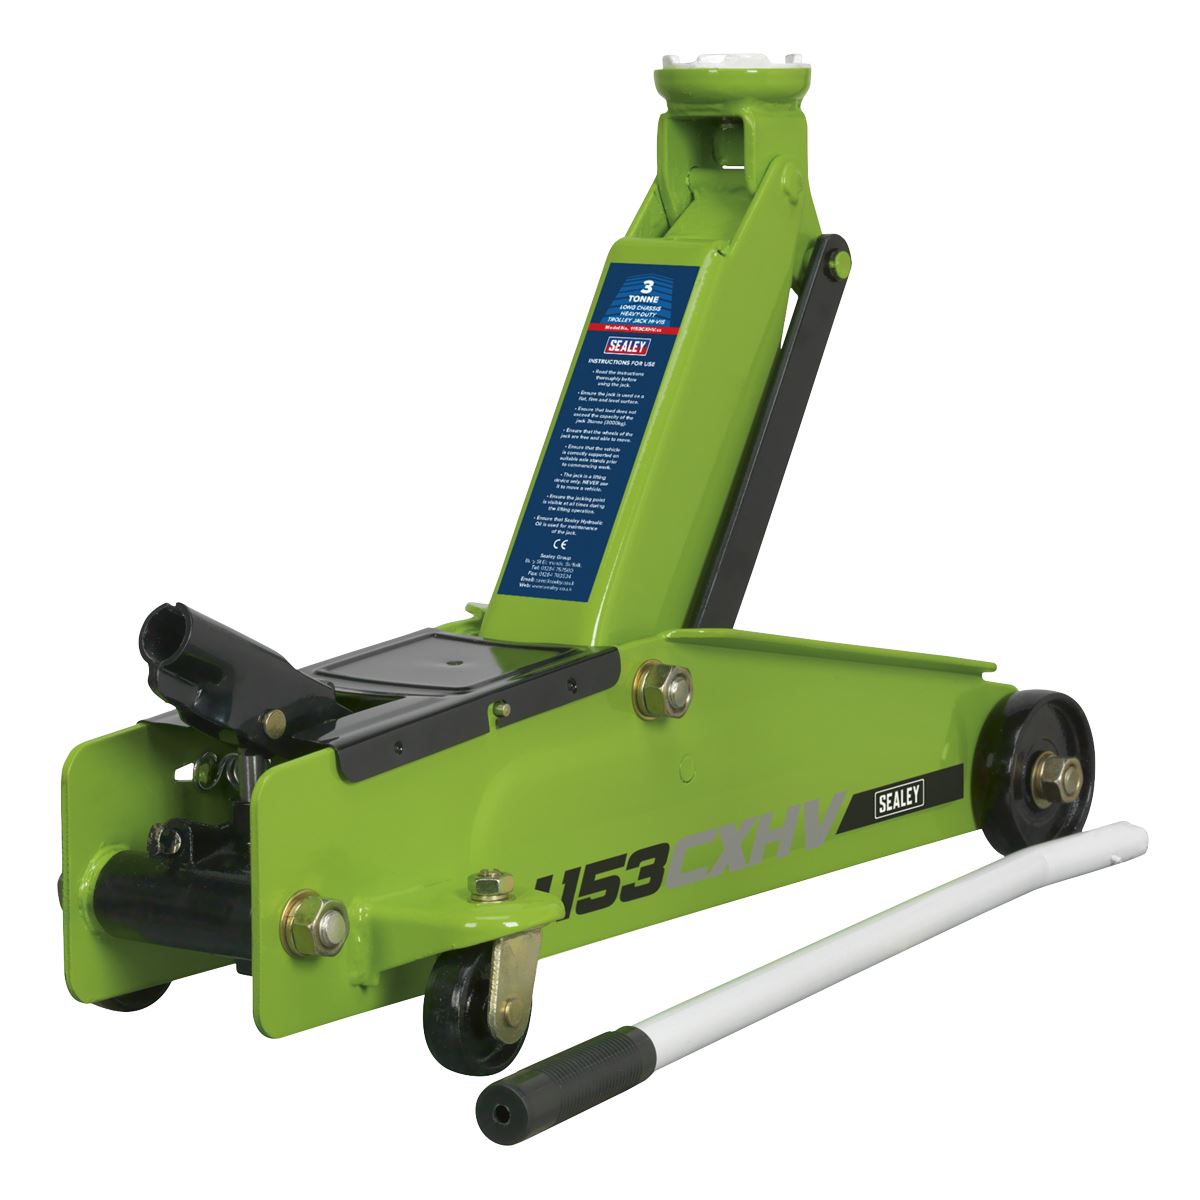 Sealey Jack Stand Deal 3 Tonne